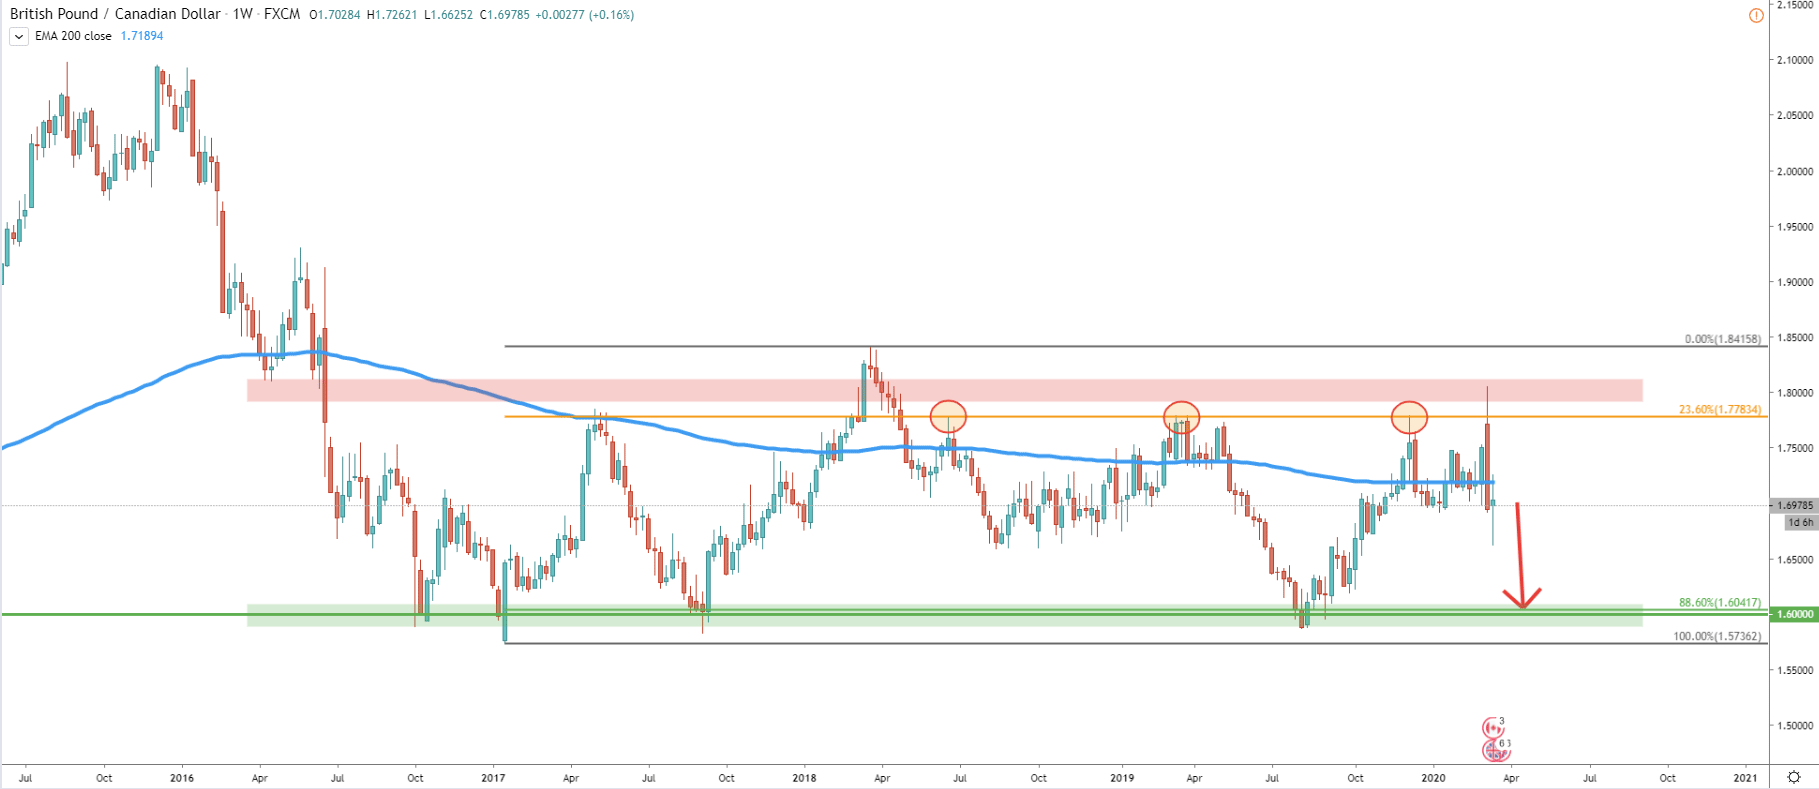 GBP/CAD Weekly Technical Analysis 19 Mar 2020